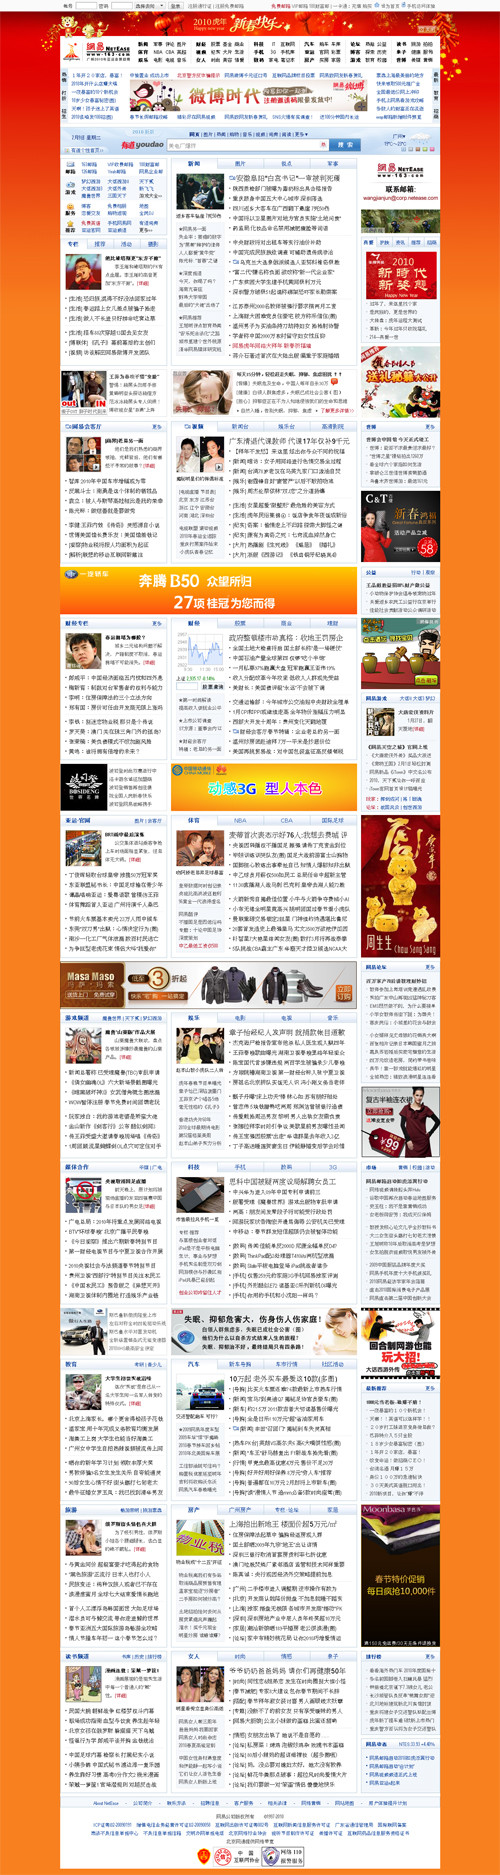 Image-netease in Showcase Of Web Design In China: From Imitation To Innovation